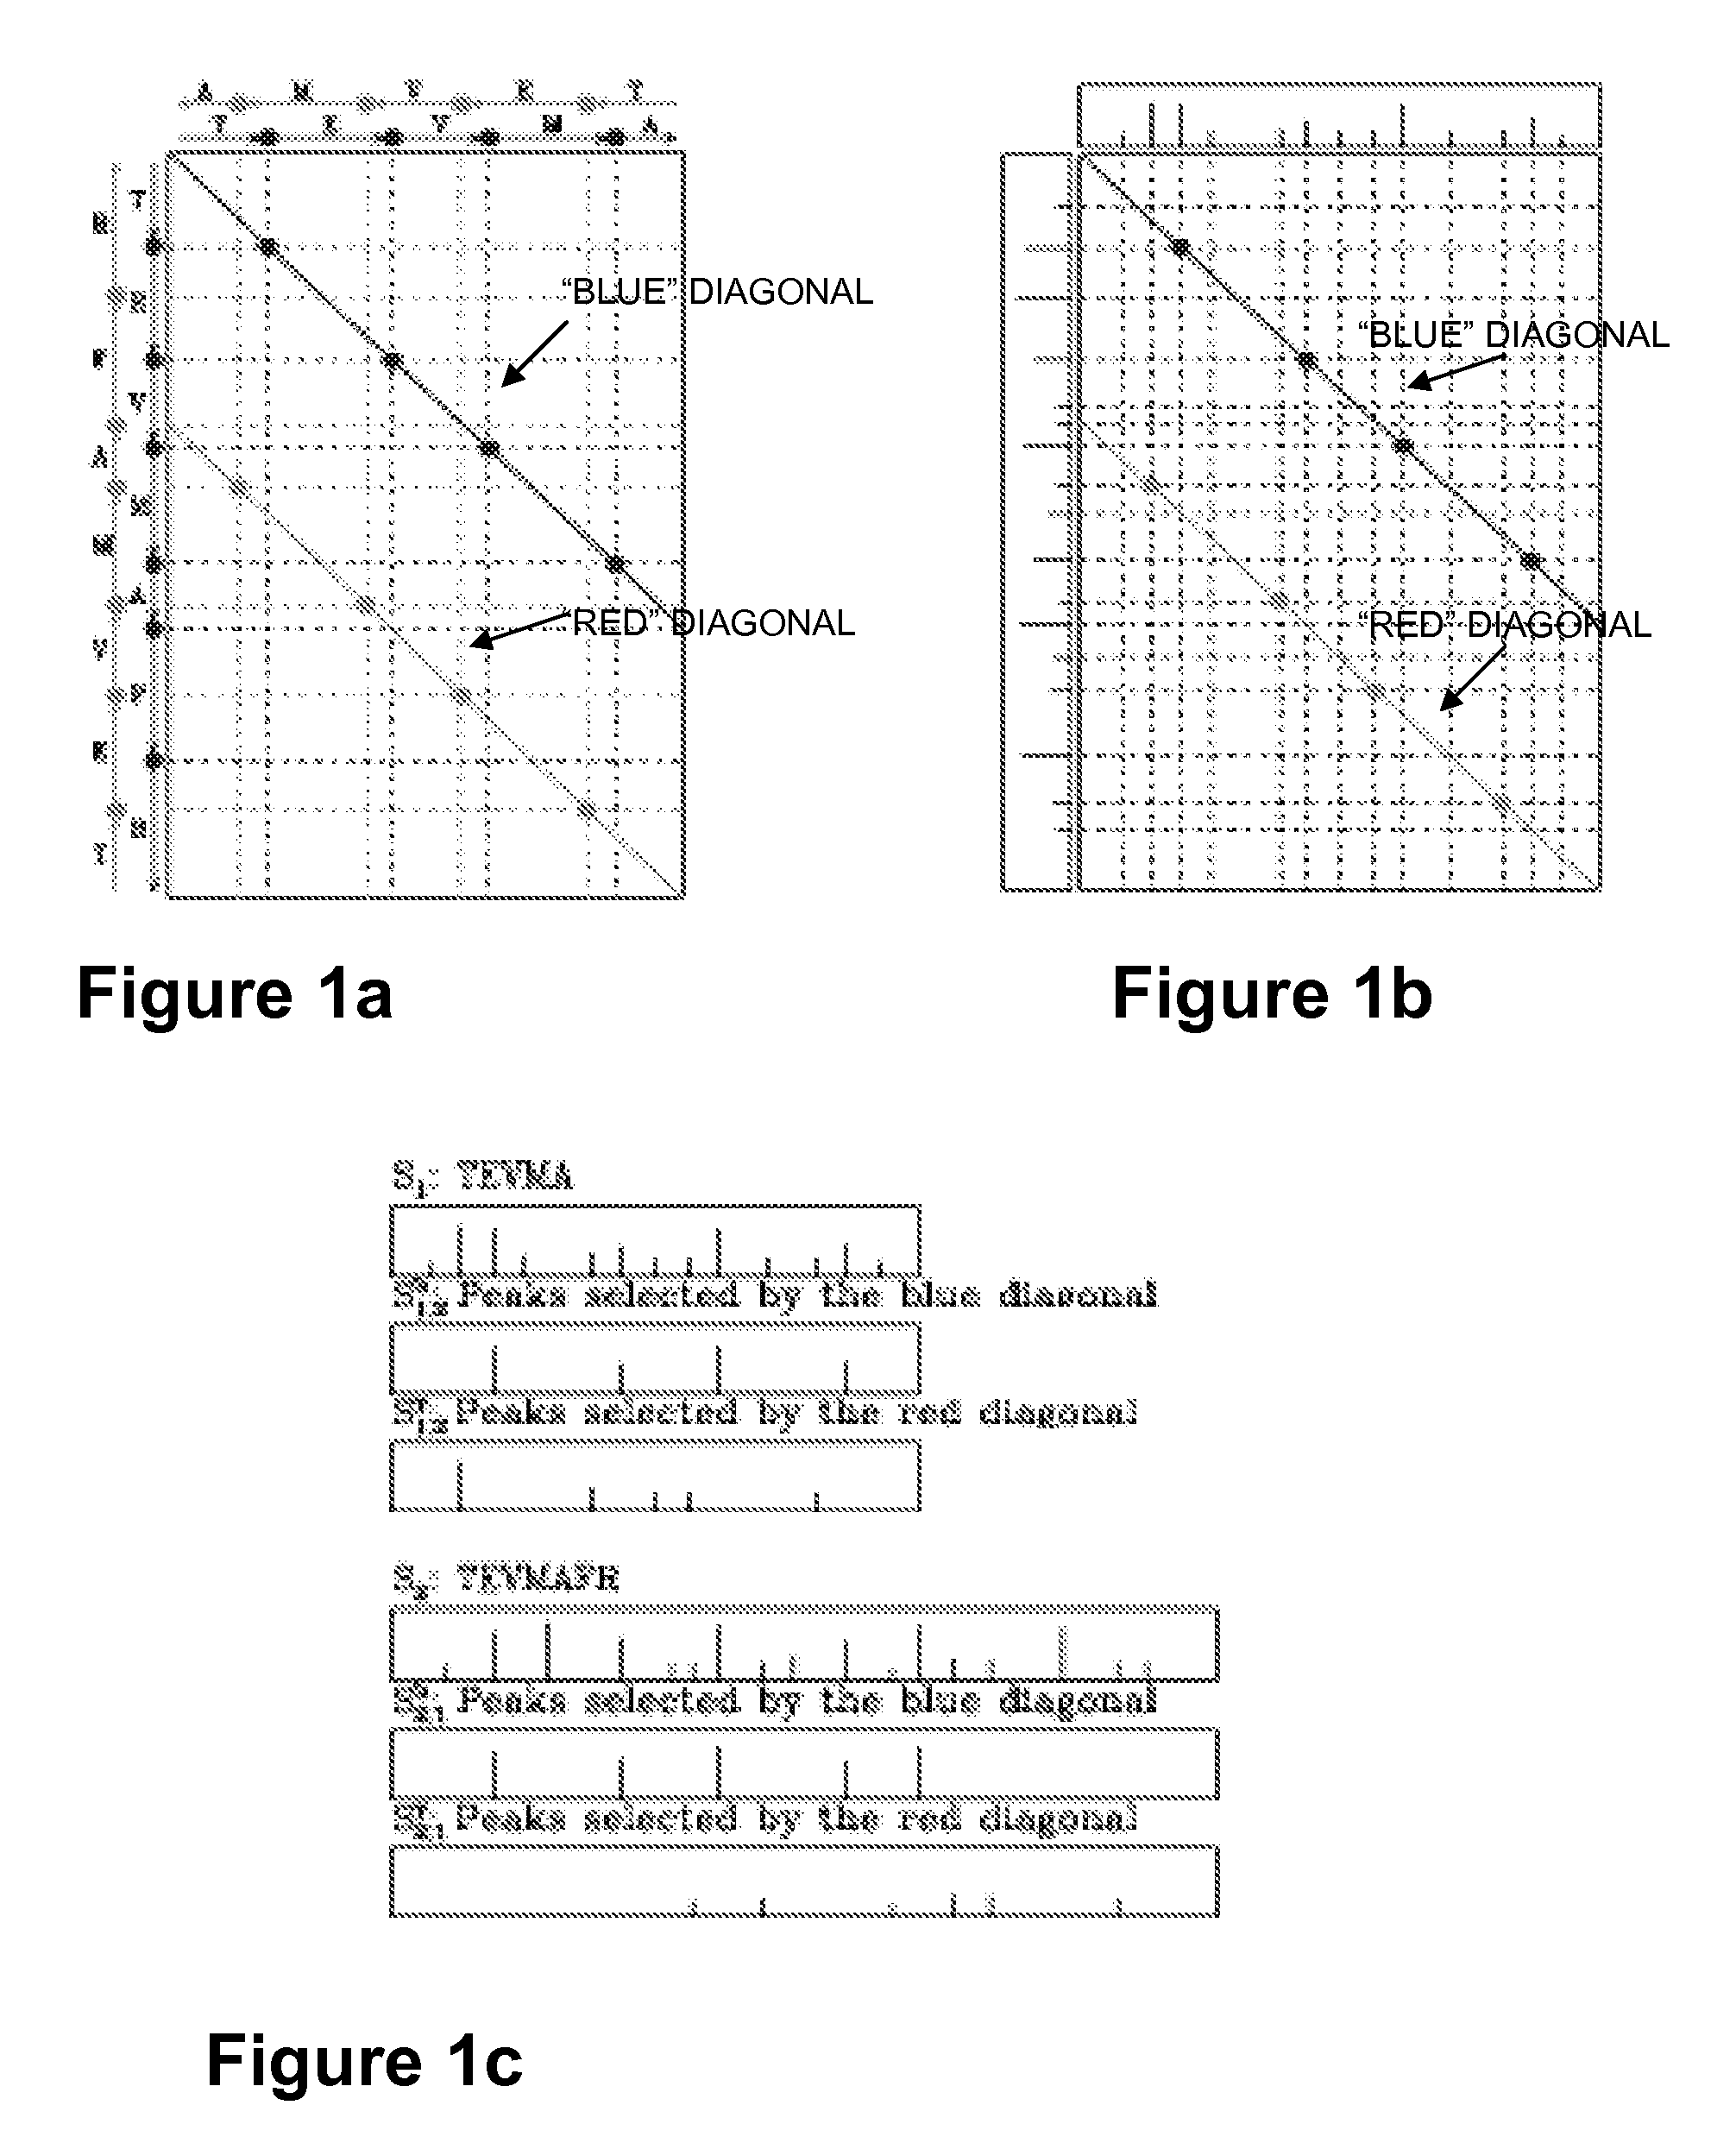 Method for identification and sequencing of proteins